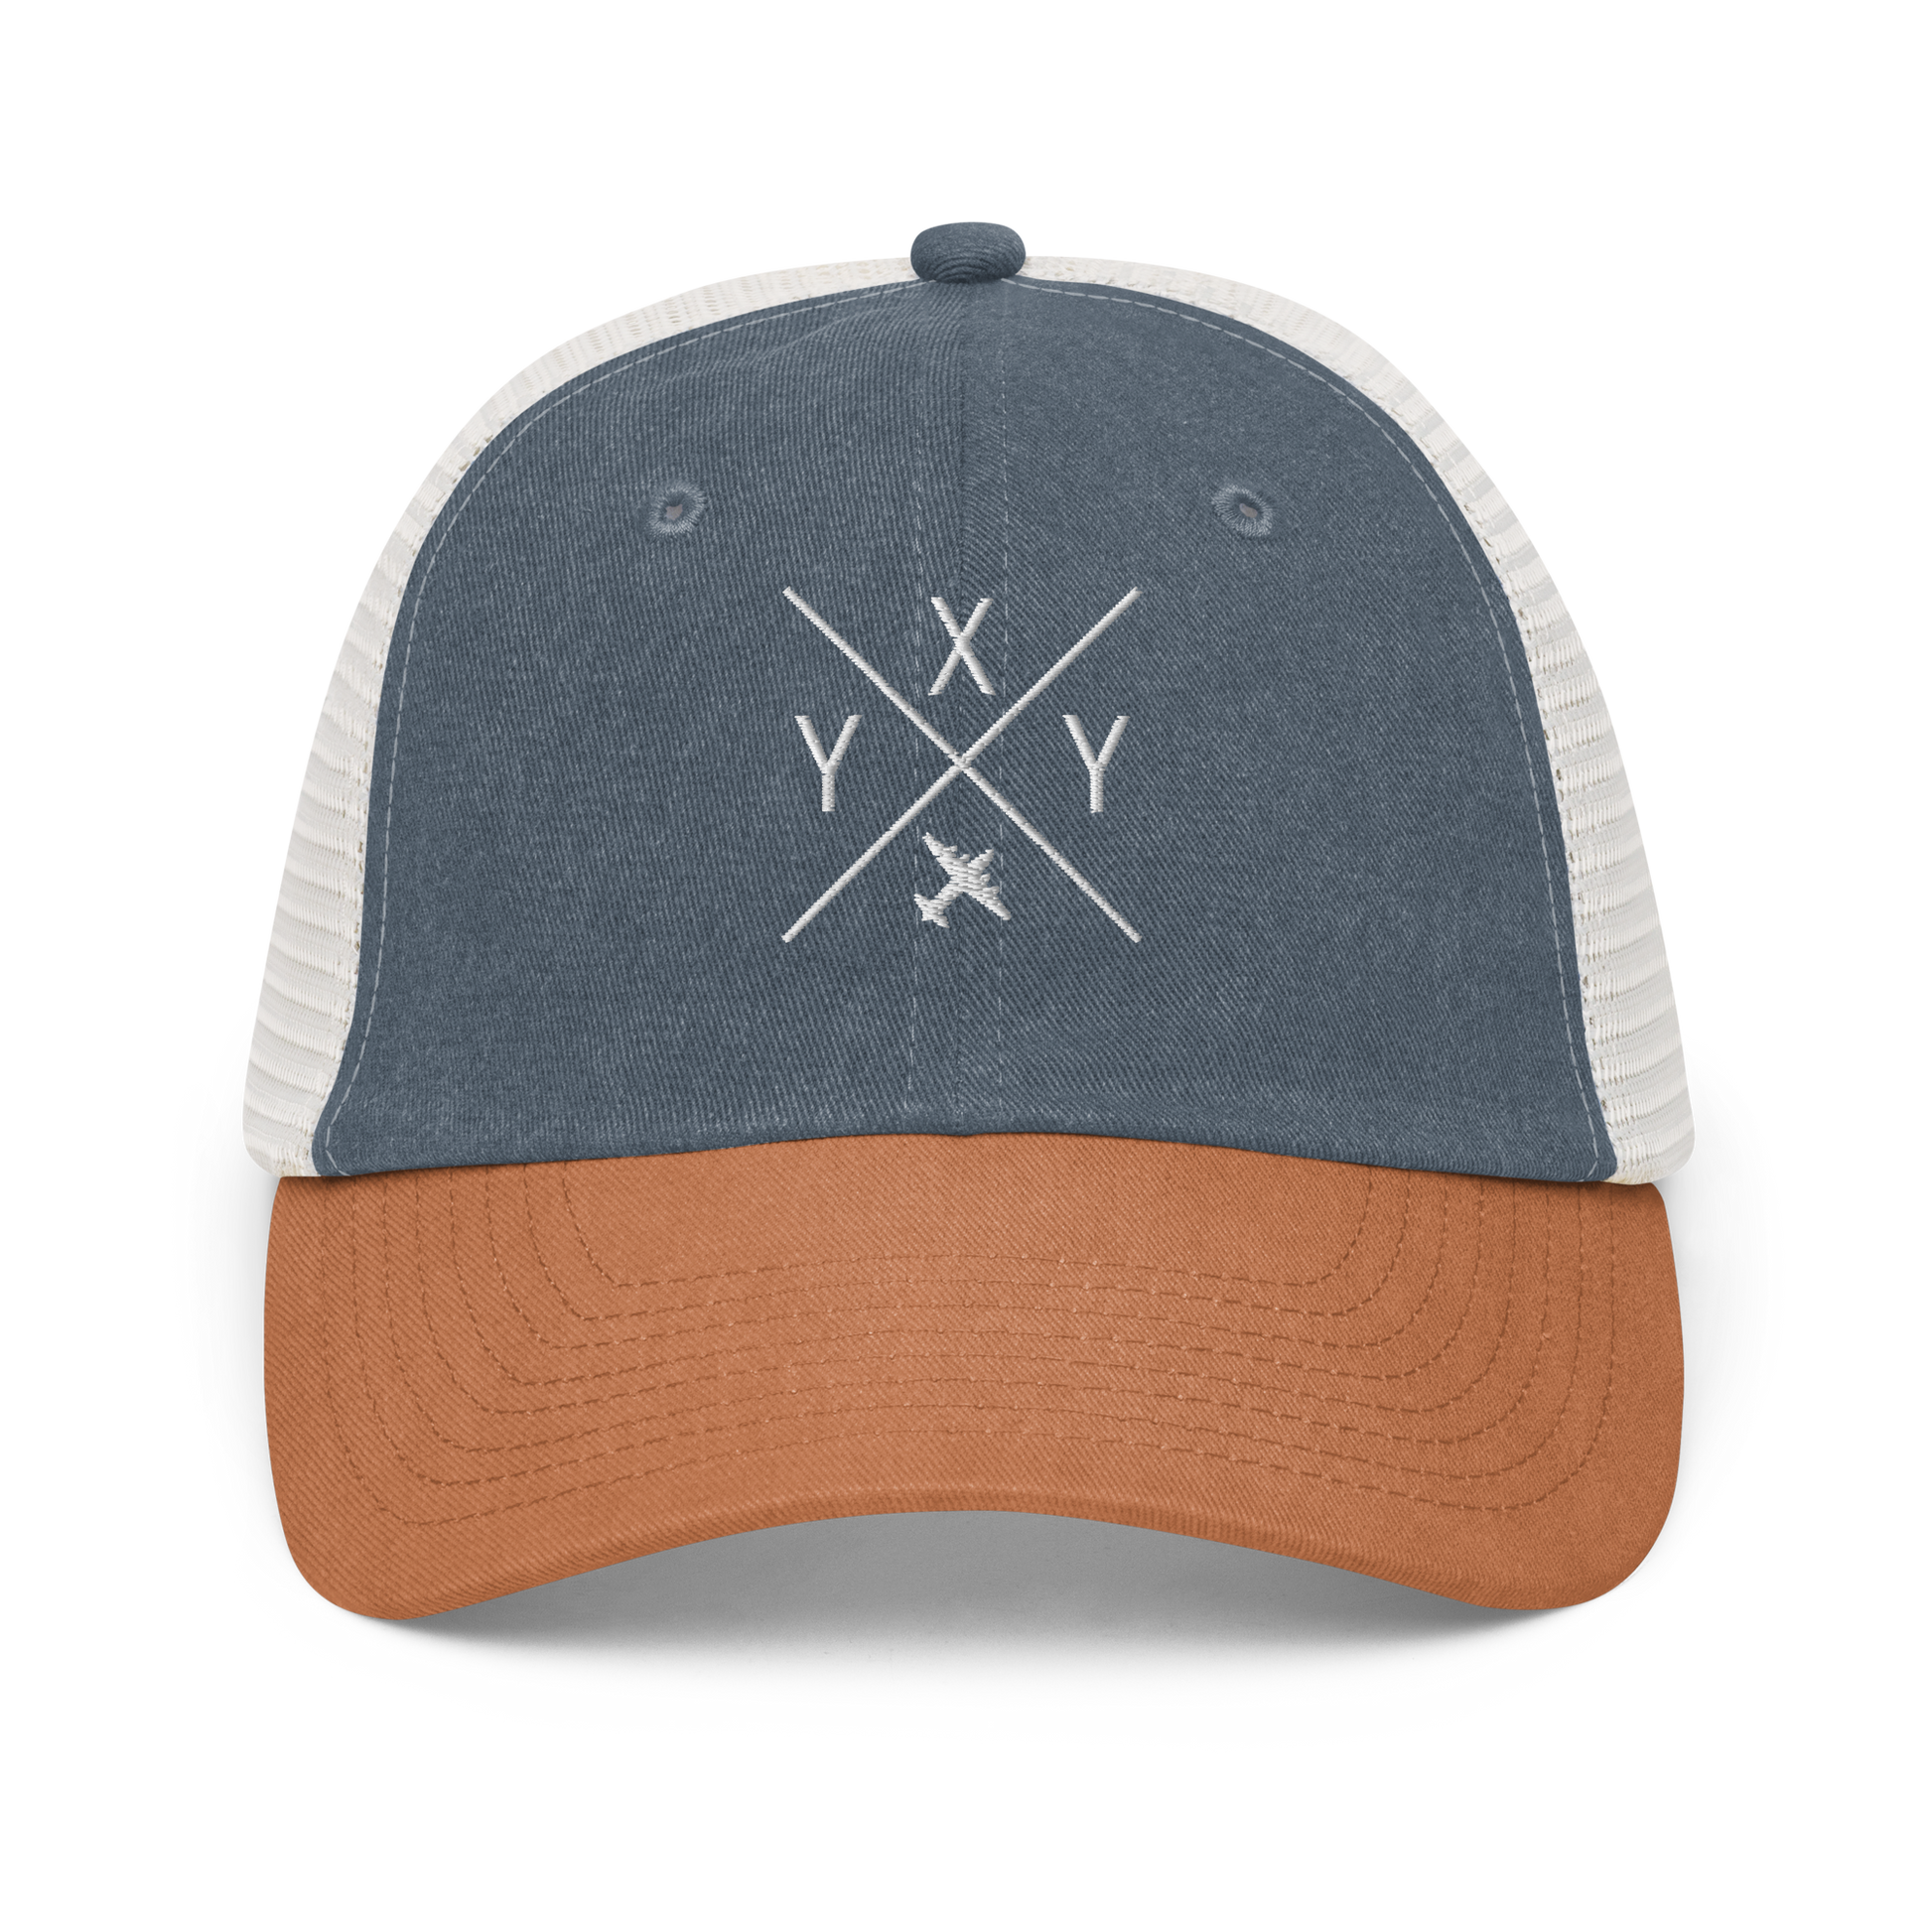 Crossed-X Pigment-Dyed Trucker Cap • YXY Whitehorse • YHM Designs - Image 15